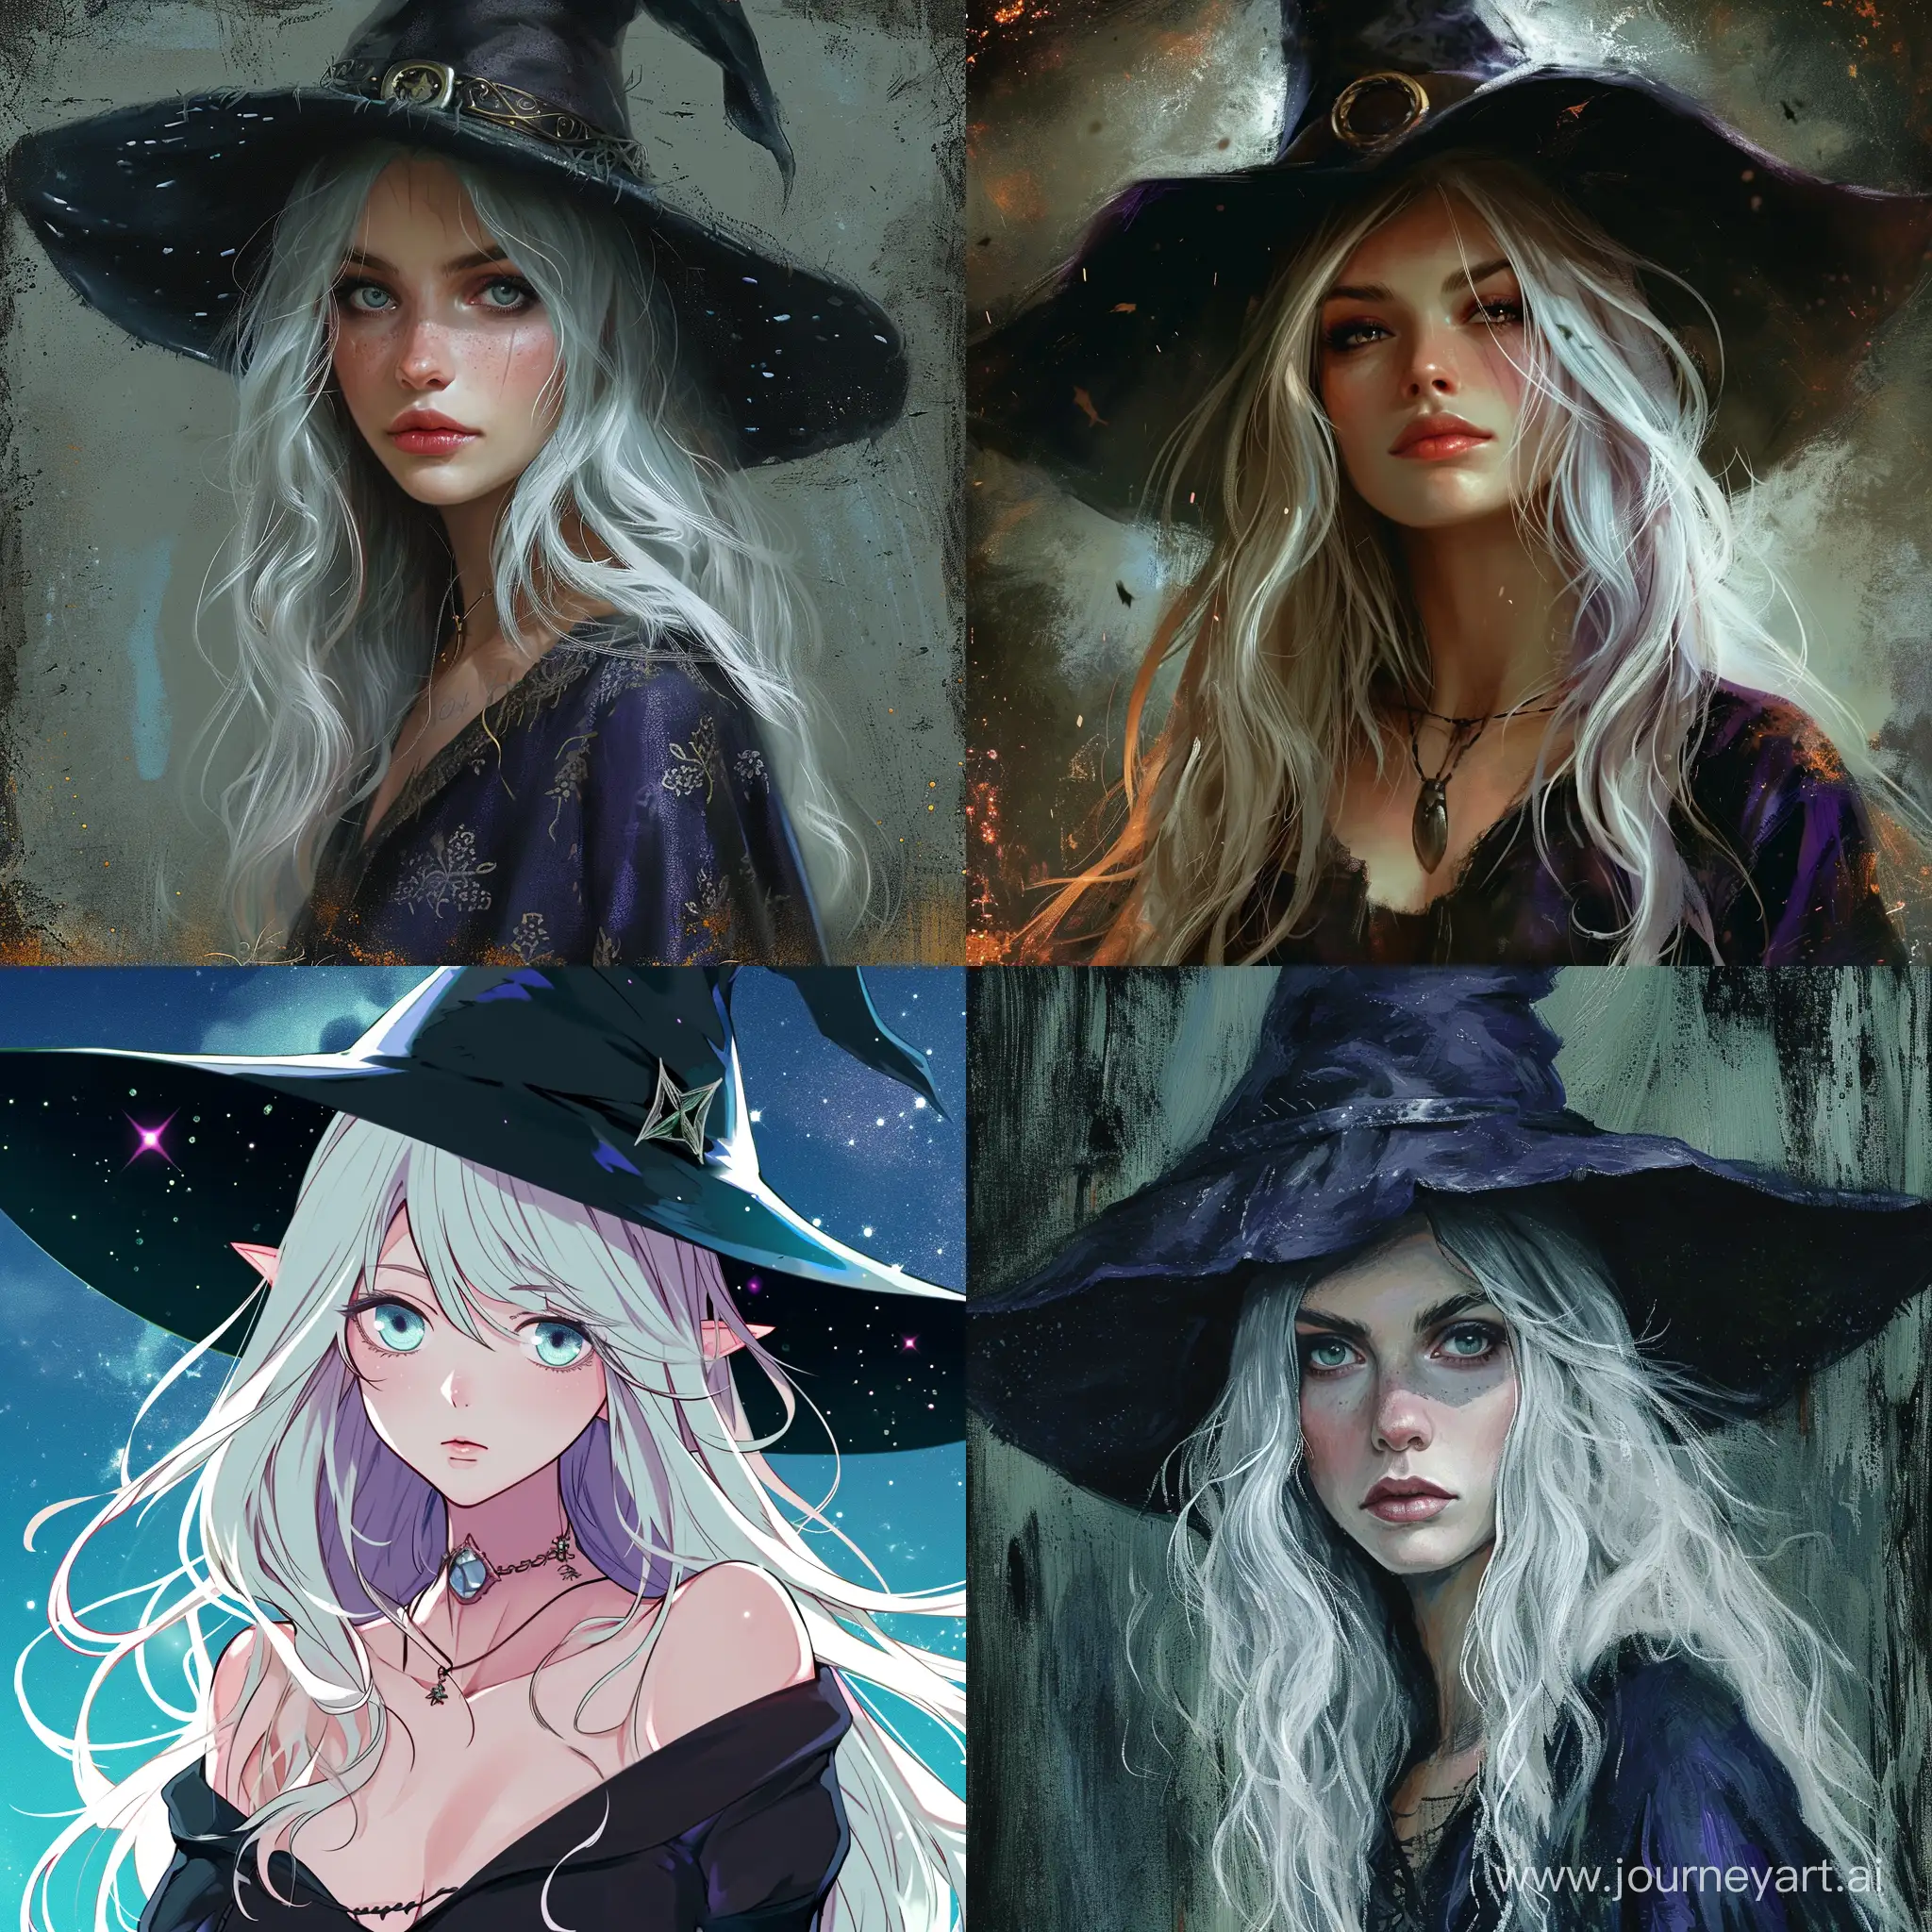 Enchanting-WhiteHaired-Witch-Portrait